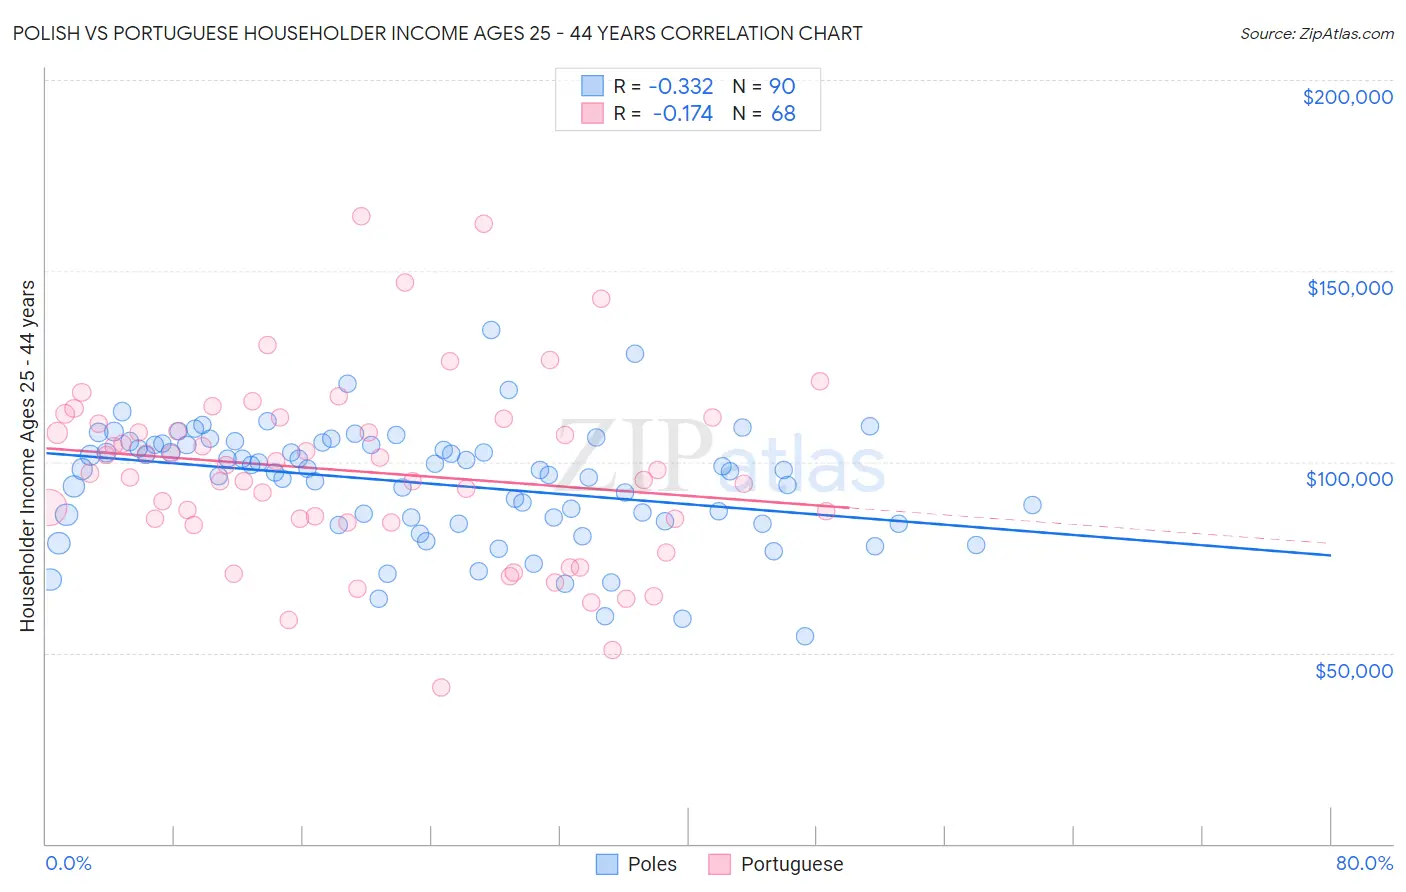 Polish vs Portuguese Householder Income Ages 25 - 44 years